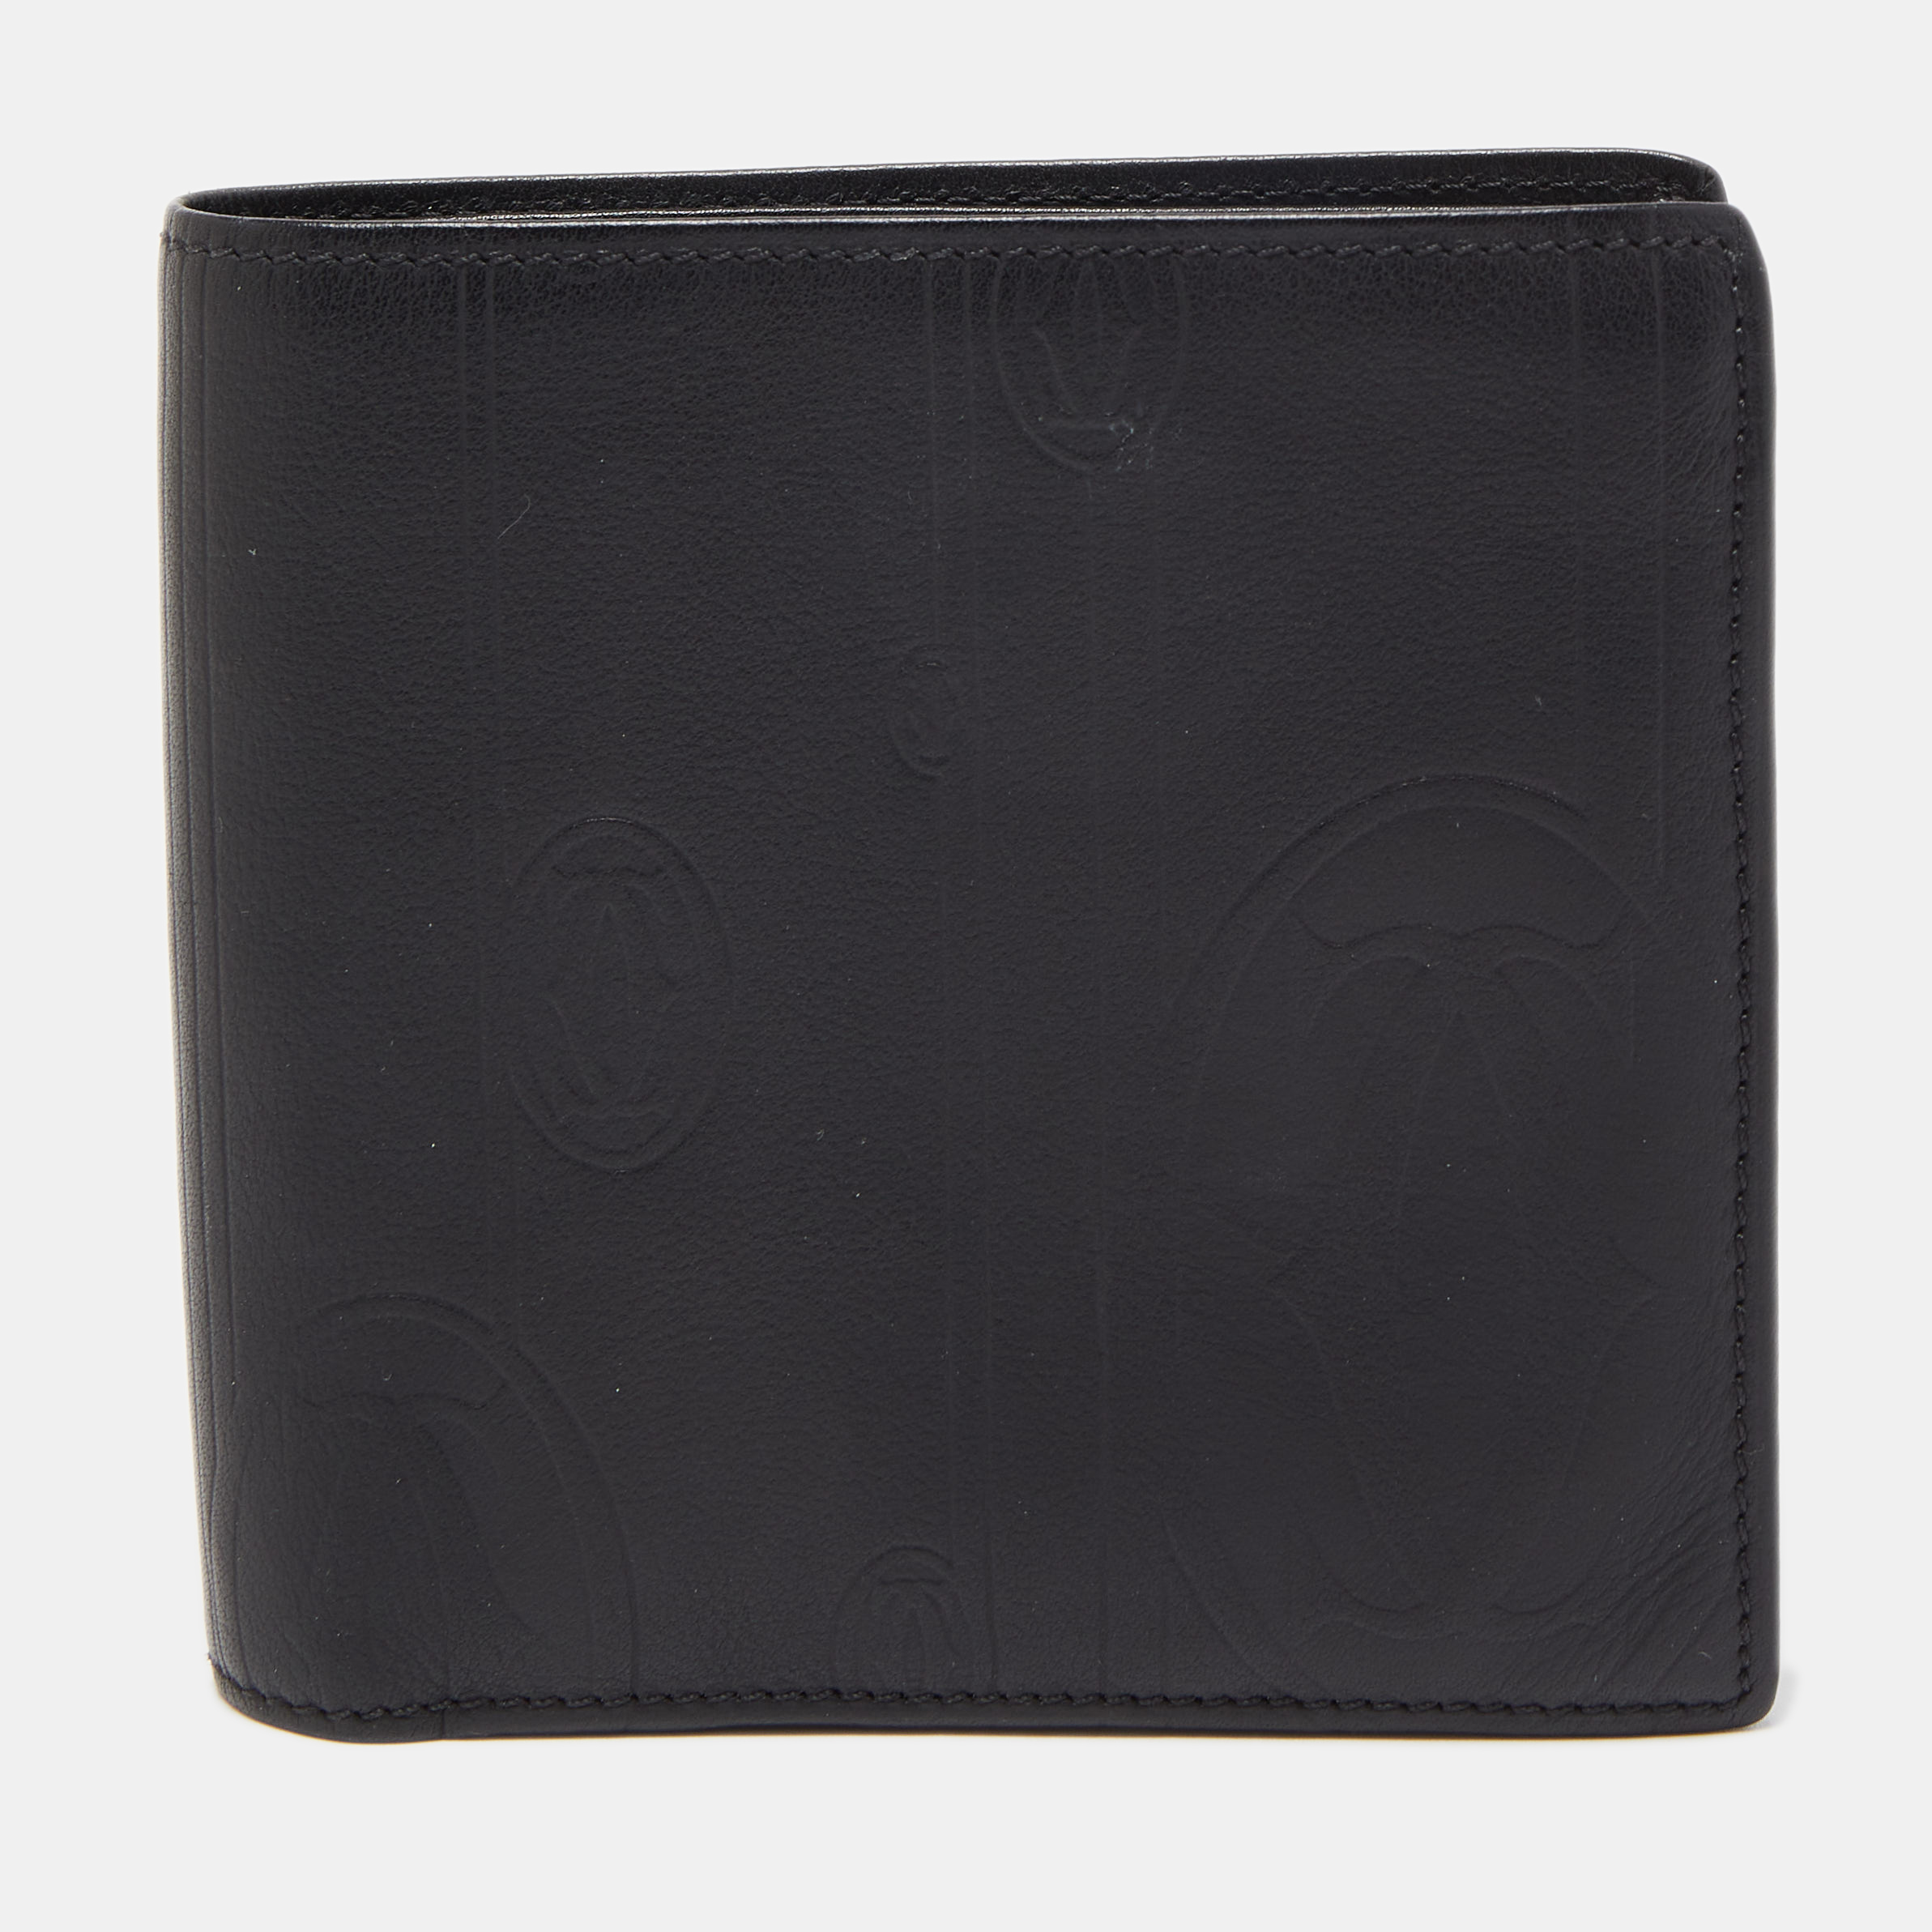 Pre-owned Cartier Black Leather Bifold Wallet